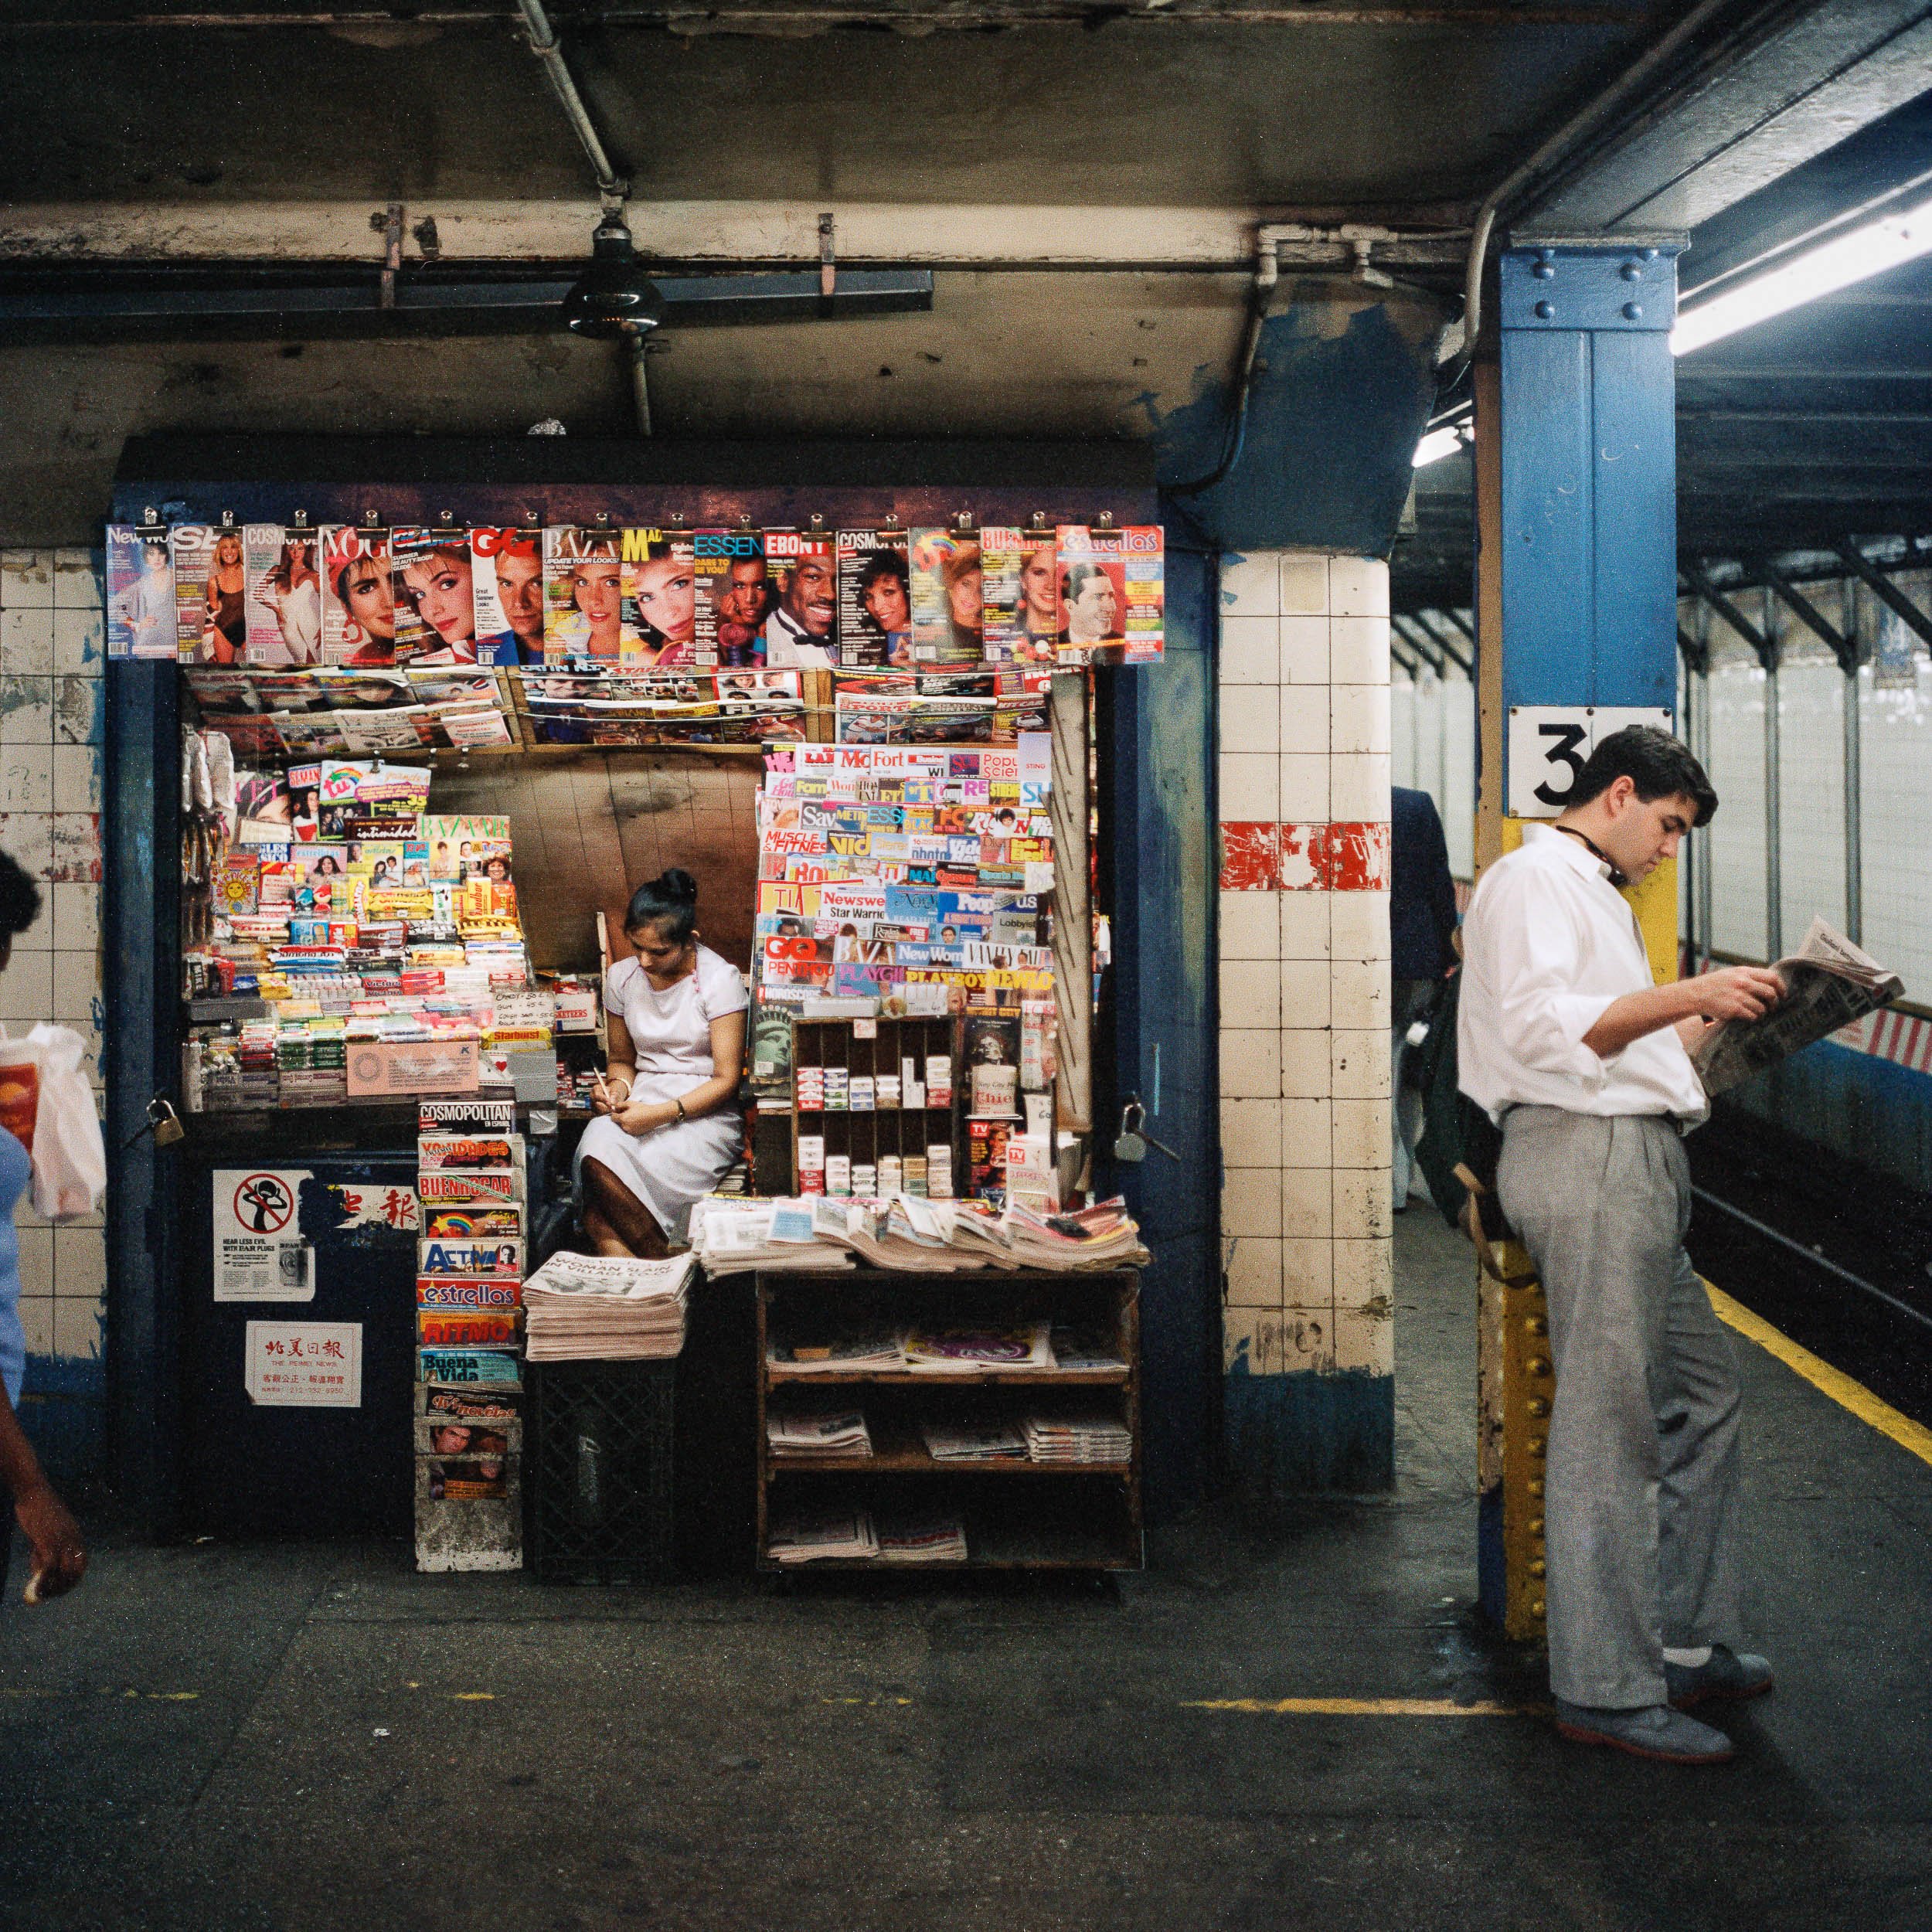   Newsstand in the Subway, 1985  